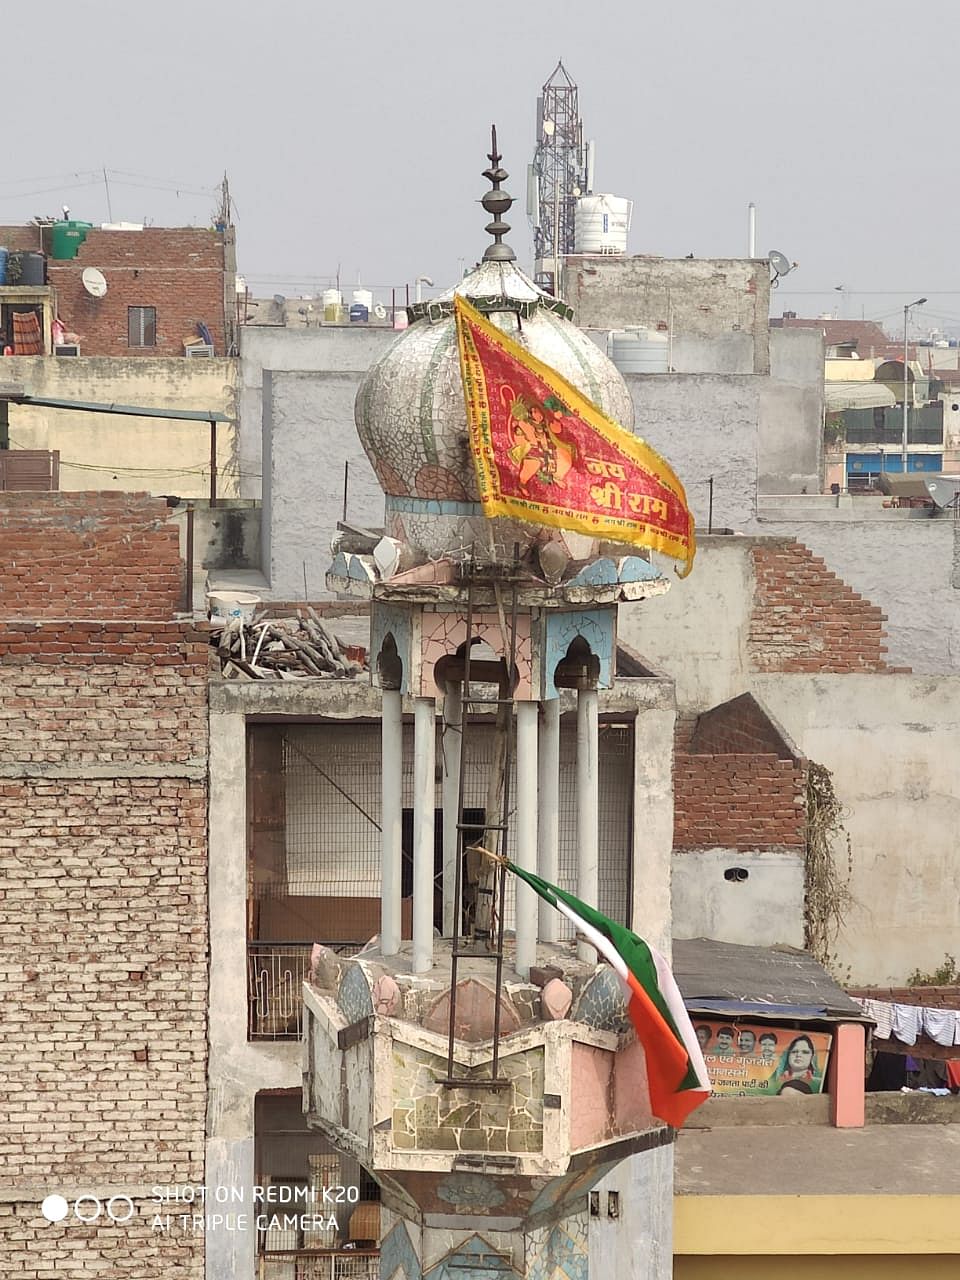 The flag that was hoisted at the Ashok Nagar mosque has a picture of Lord Hanuman and “Jai Shri Ram” written on it.